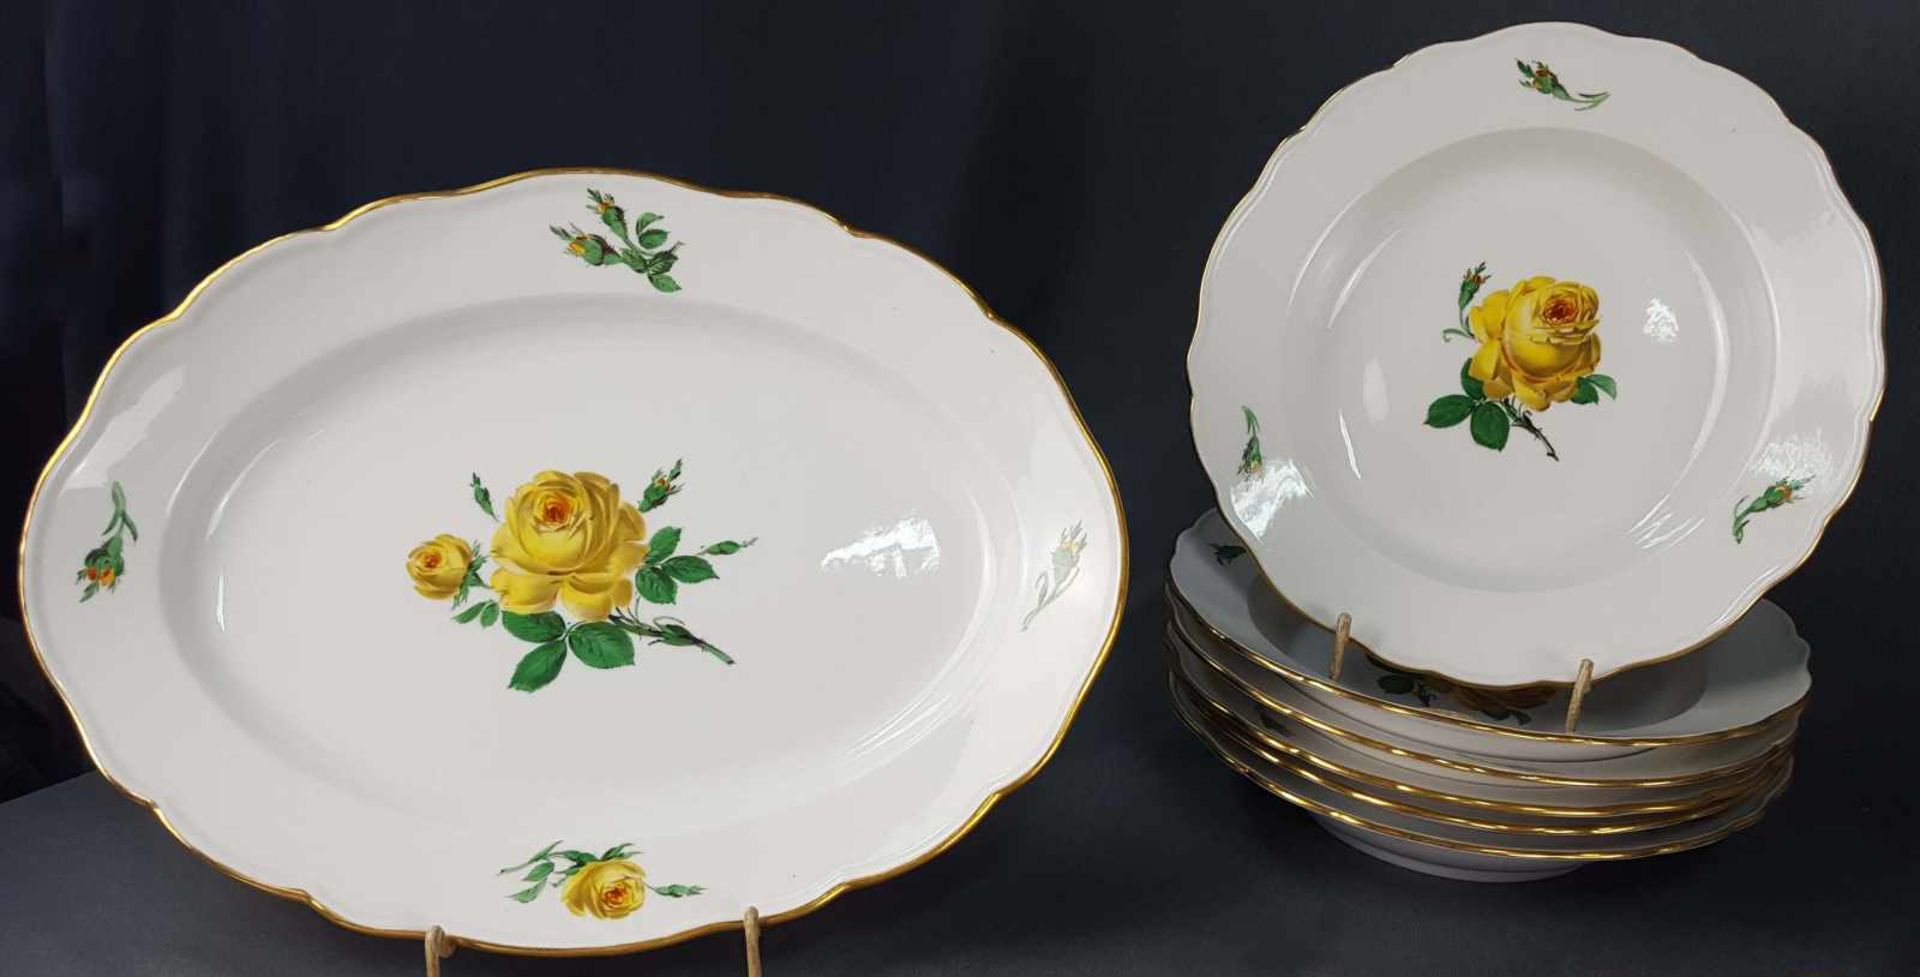 Dining service Meissen porcelain, yellow rose with gold rim. - Image 2 of 18